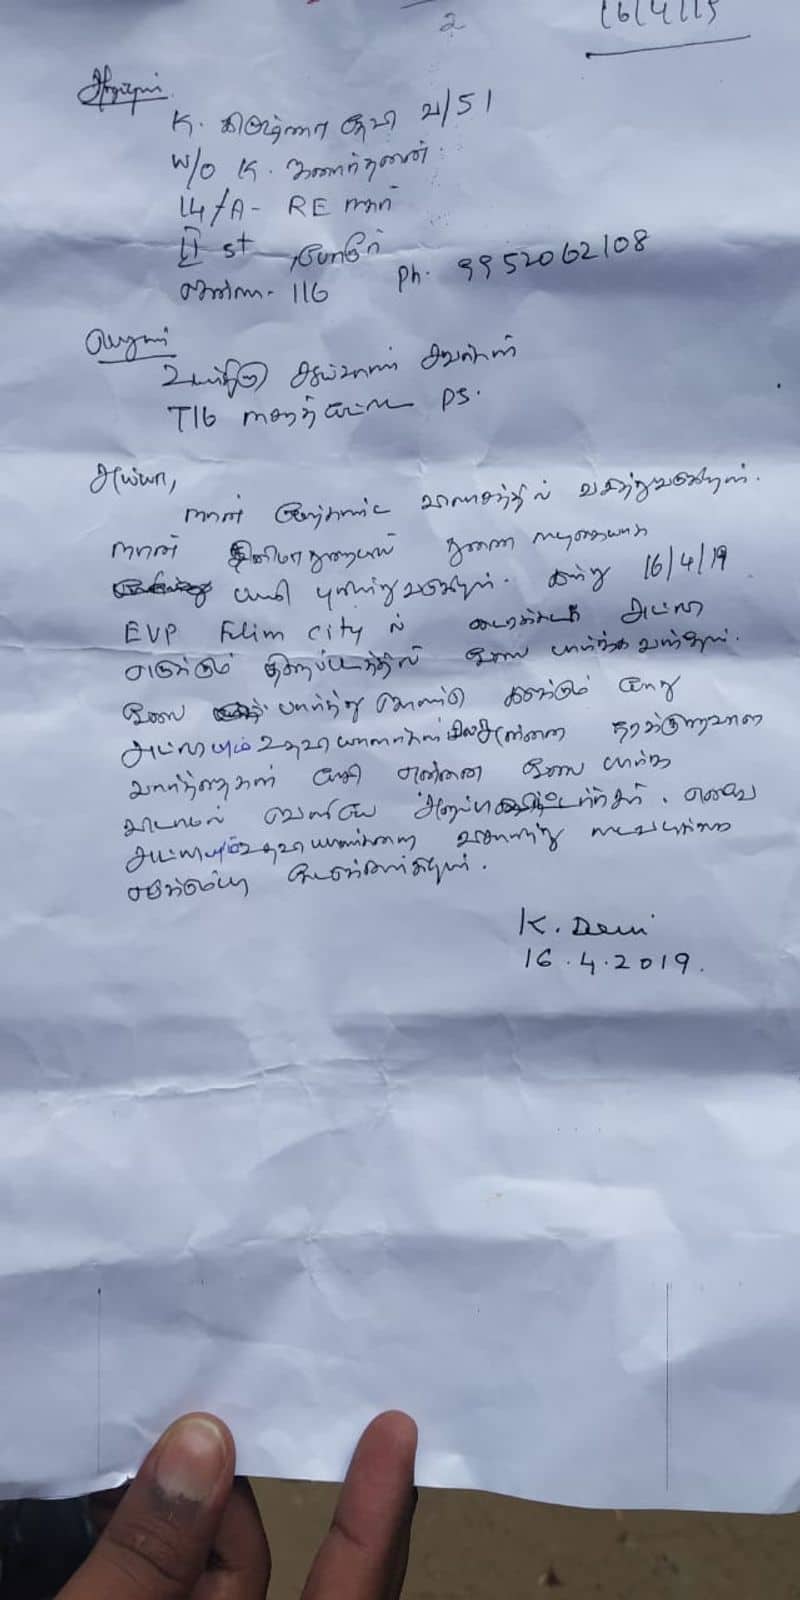 vijay 63 shooting issue side actress complaint letter released